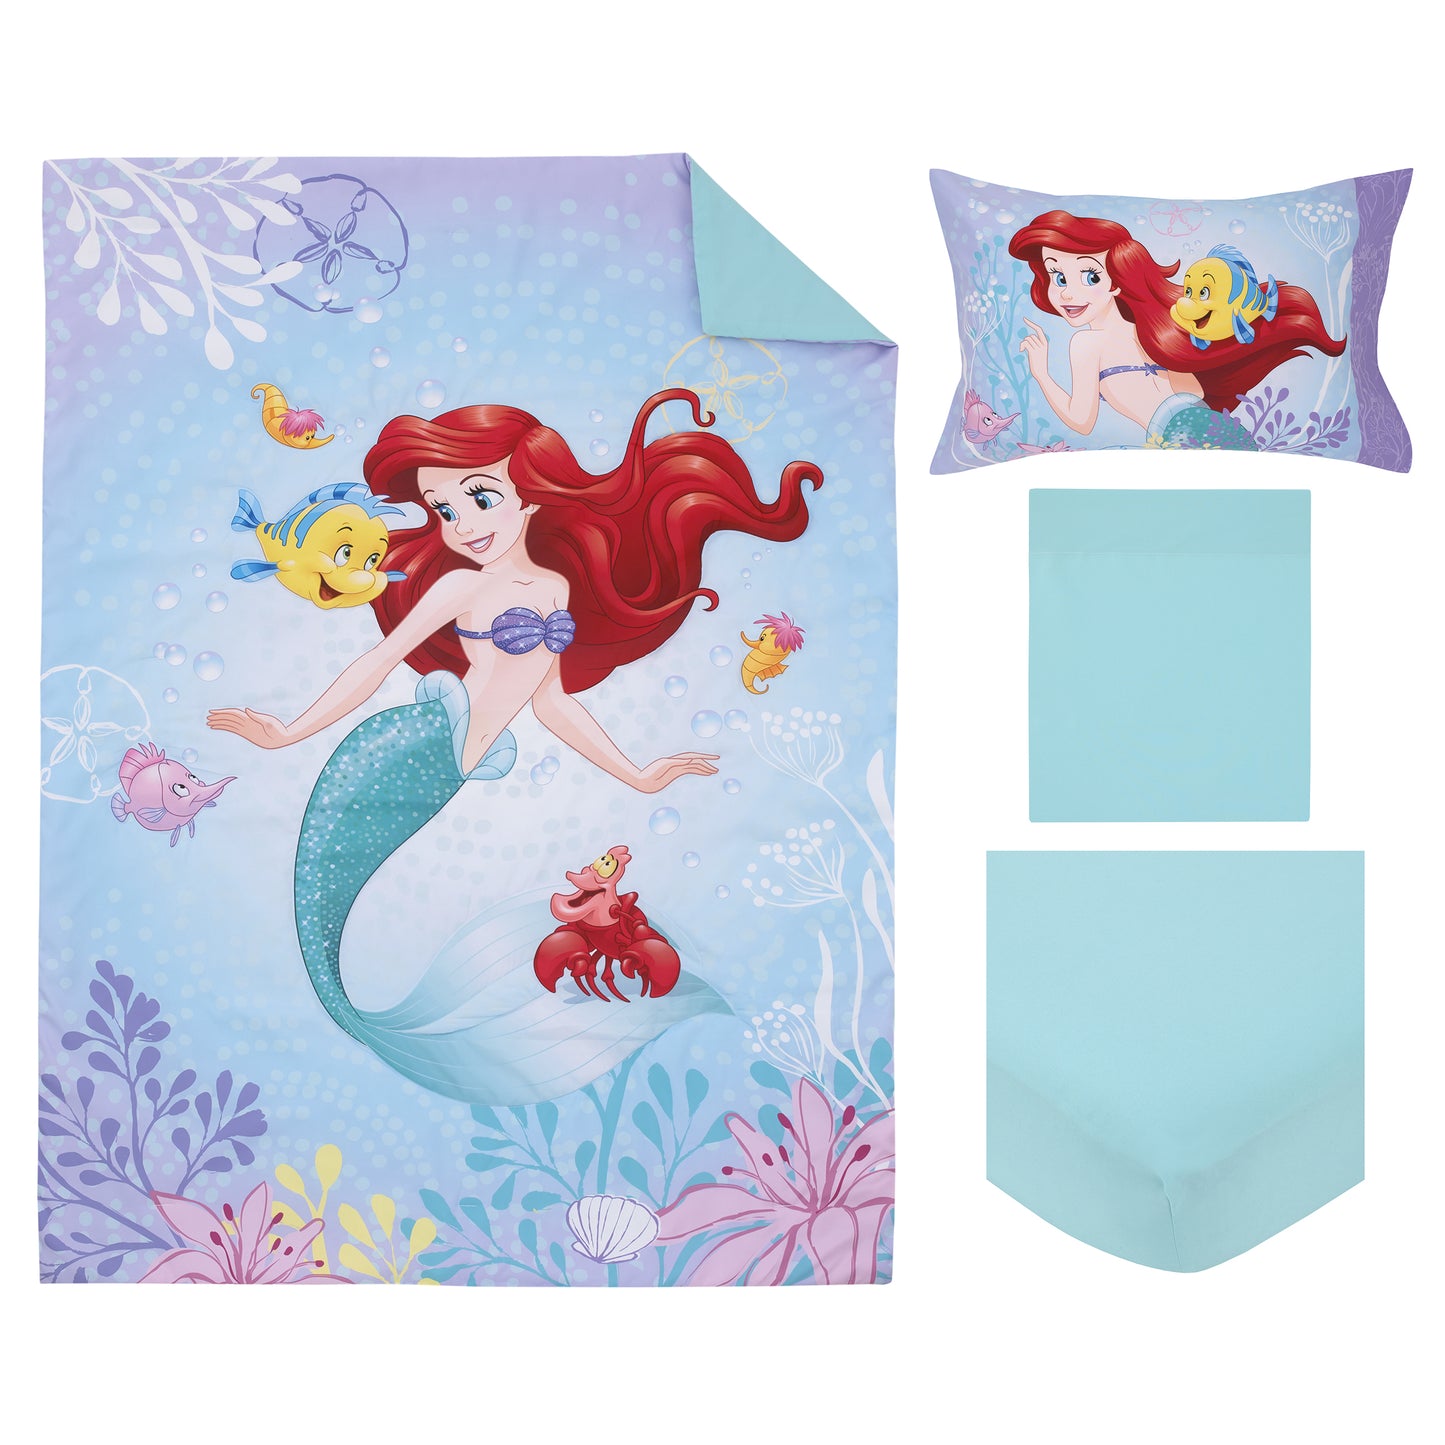 Disney The Little Mermaid Be Fearless Aqua, Lavender, and Orange Ariel 4 Piece Toddler Bed Set - Comforter, Fitted Bottom Sheet, Flat Top Sheet, and Reversible Pillowcase